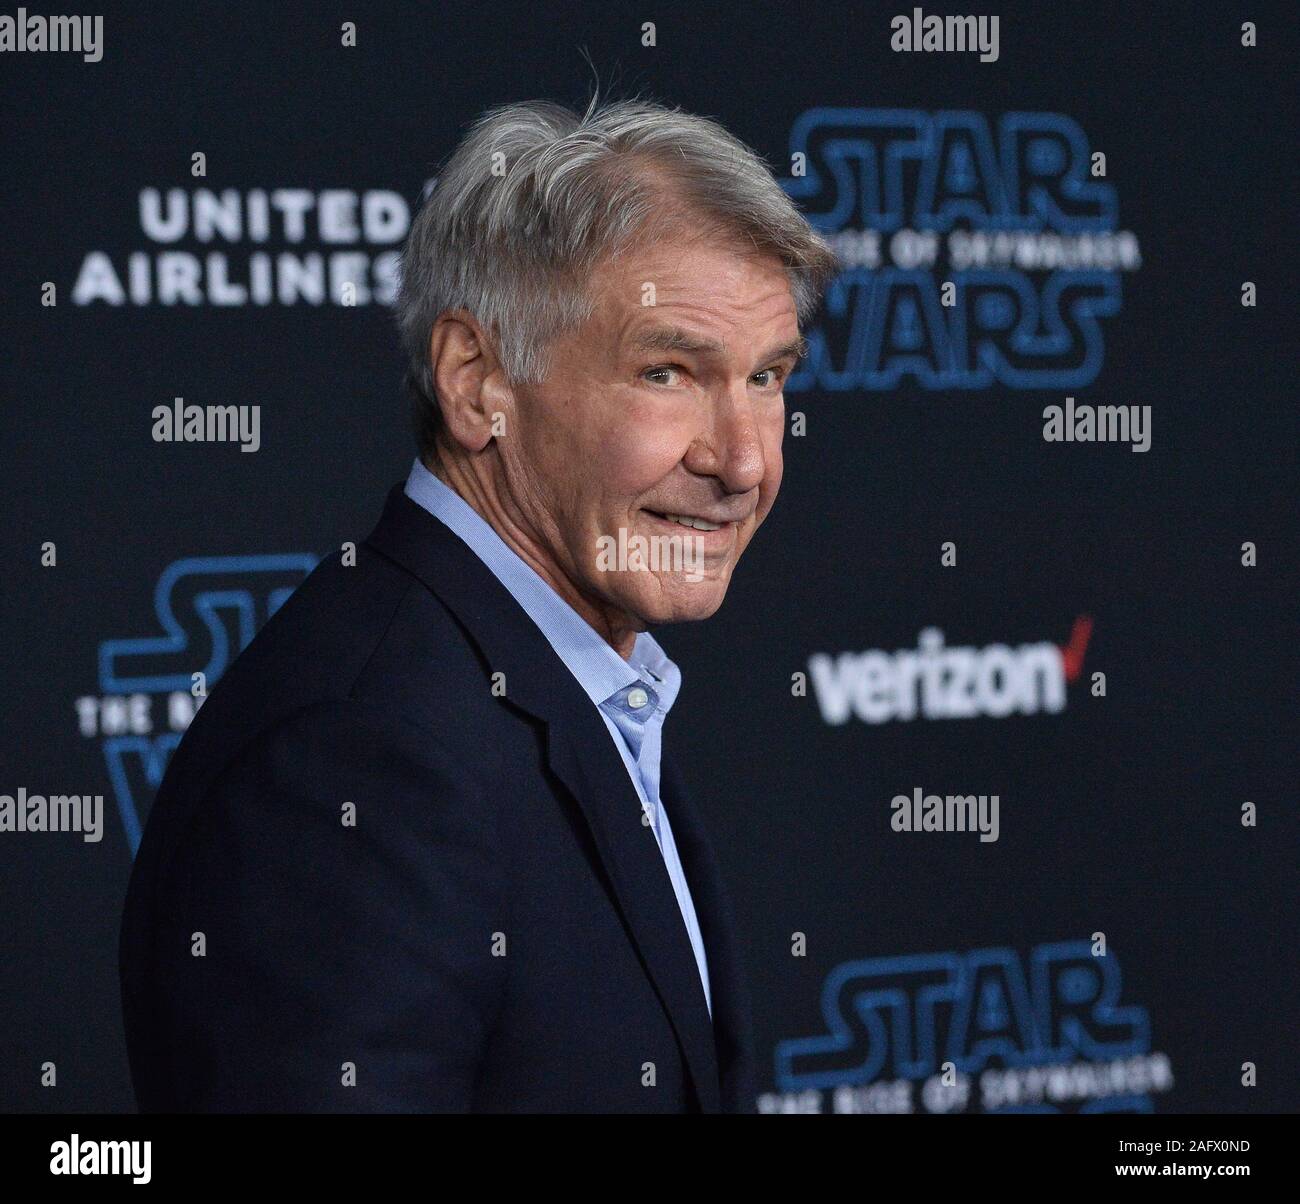 Los Angeles, United States. 17th Dec, 2019. Actor Harrison Ford attends the premiere the motion picture sci-fi fantasy 'Star Wars: The Rise of Skywalker' at the TCL Chinese Theatre in the Hollywood section of Los Angeles on Monday, December 16, 2019. Storyline: The surviving Resistance faces the First Order once more in the final chapter of the Skywalker saga. Photo by Jim Ruymen/UPI Credit: UPI/Alamy Live News Stock Photo